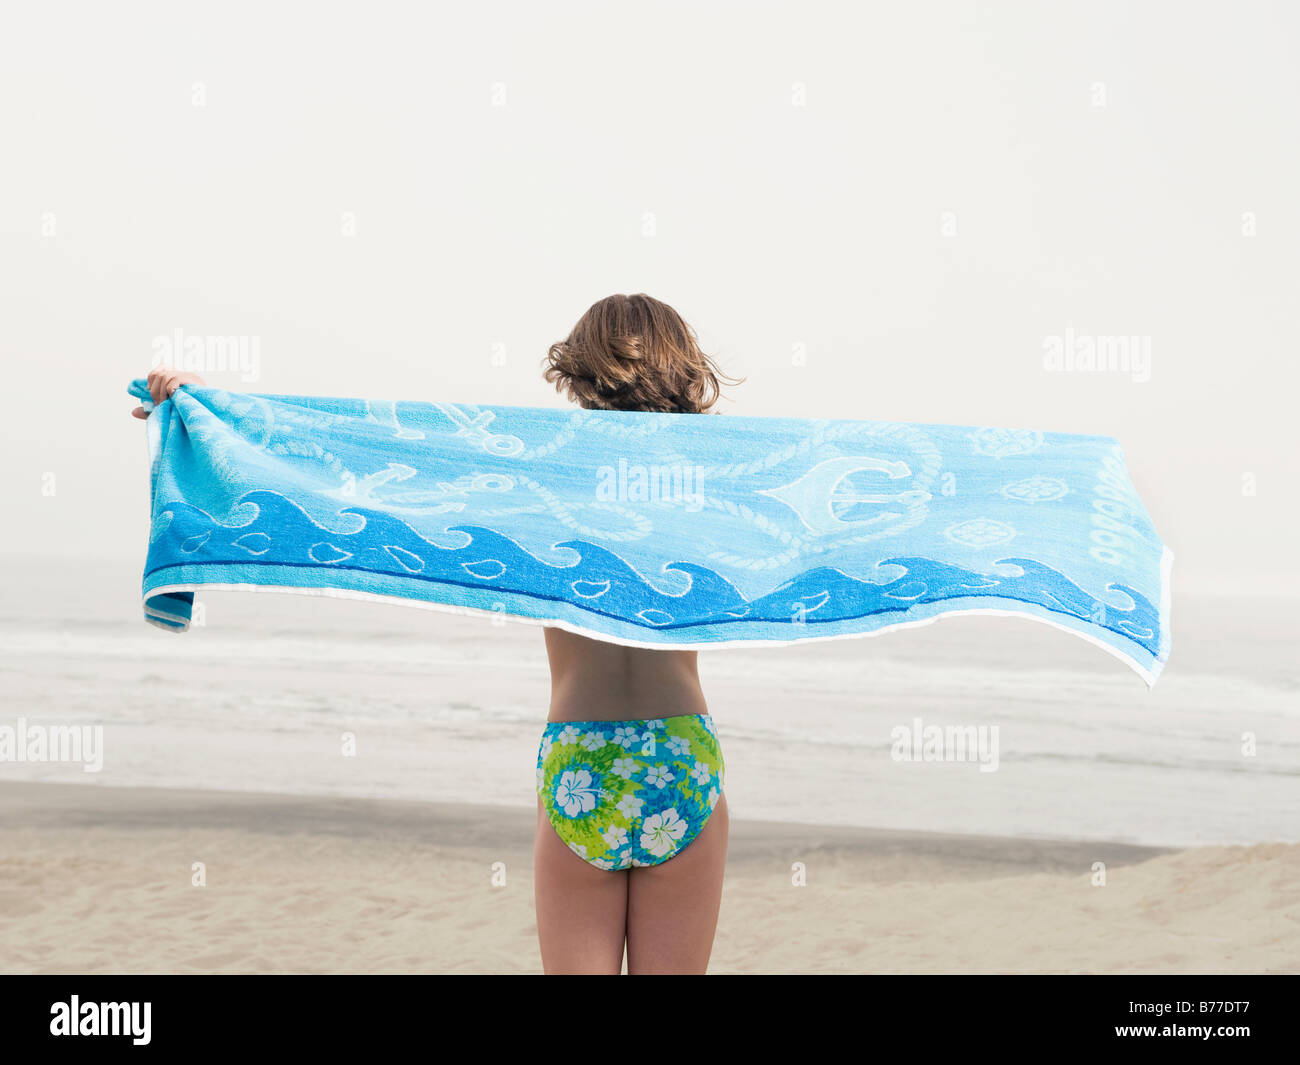 Girl holding towel on beach Banque D'Images